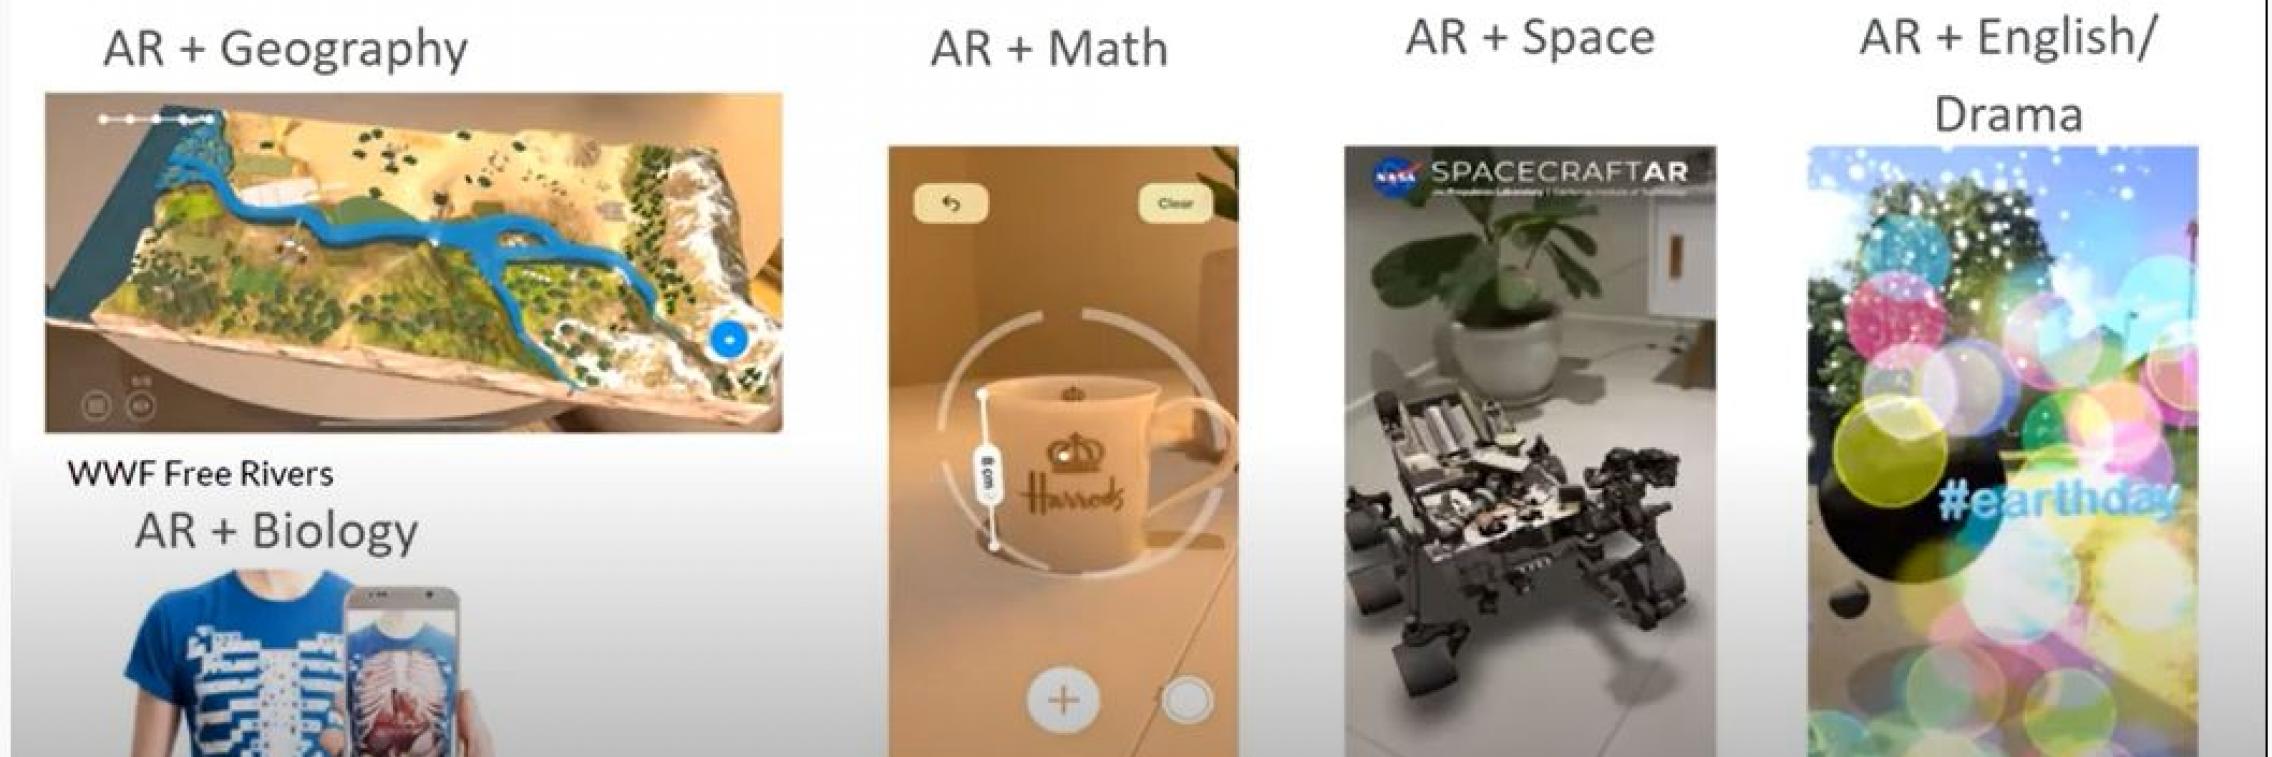 Deep Dive into AR real world examples